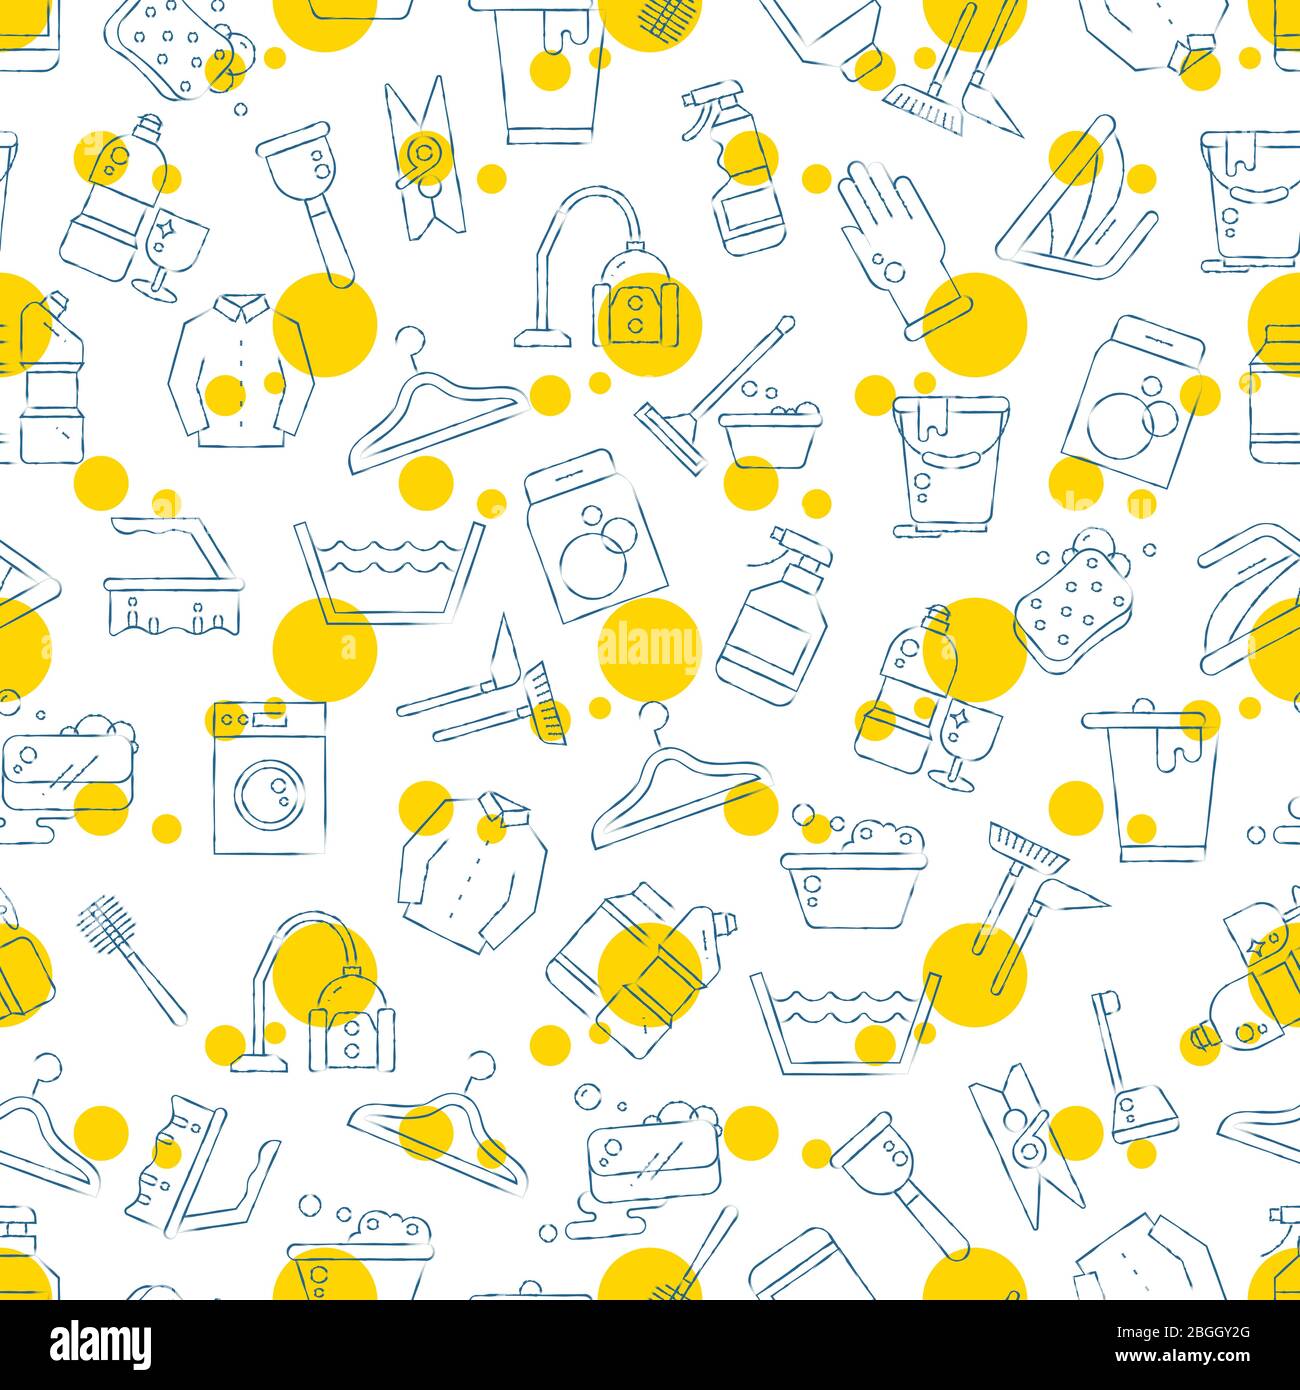 Cleaning, washing, housework line style seamless background pattern design. Vector illustration Stock Vector